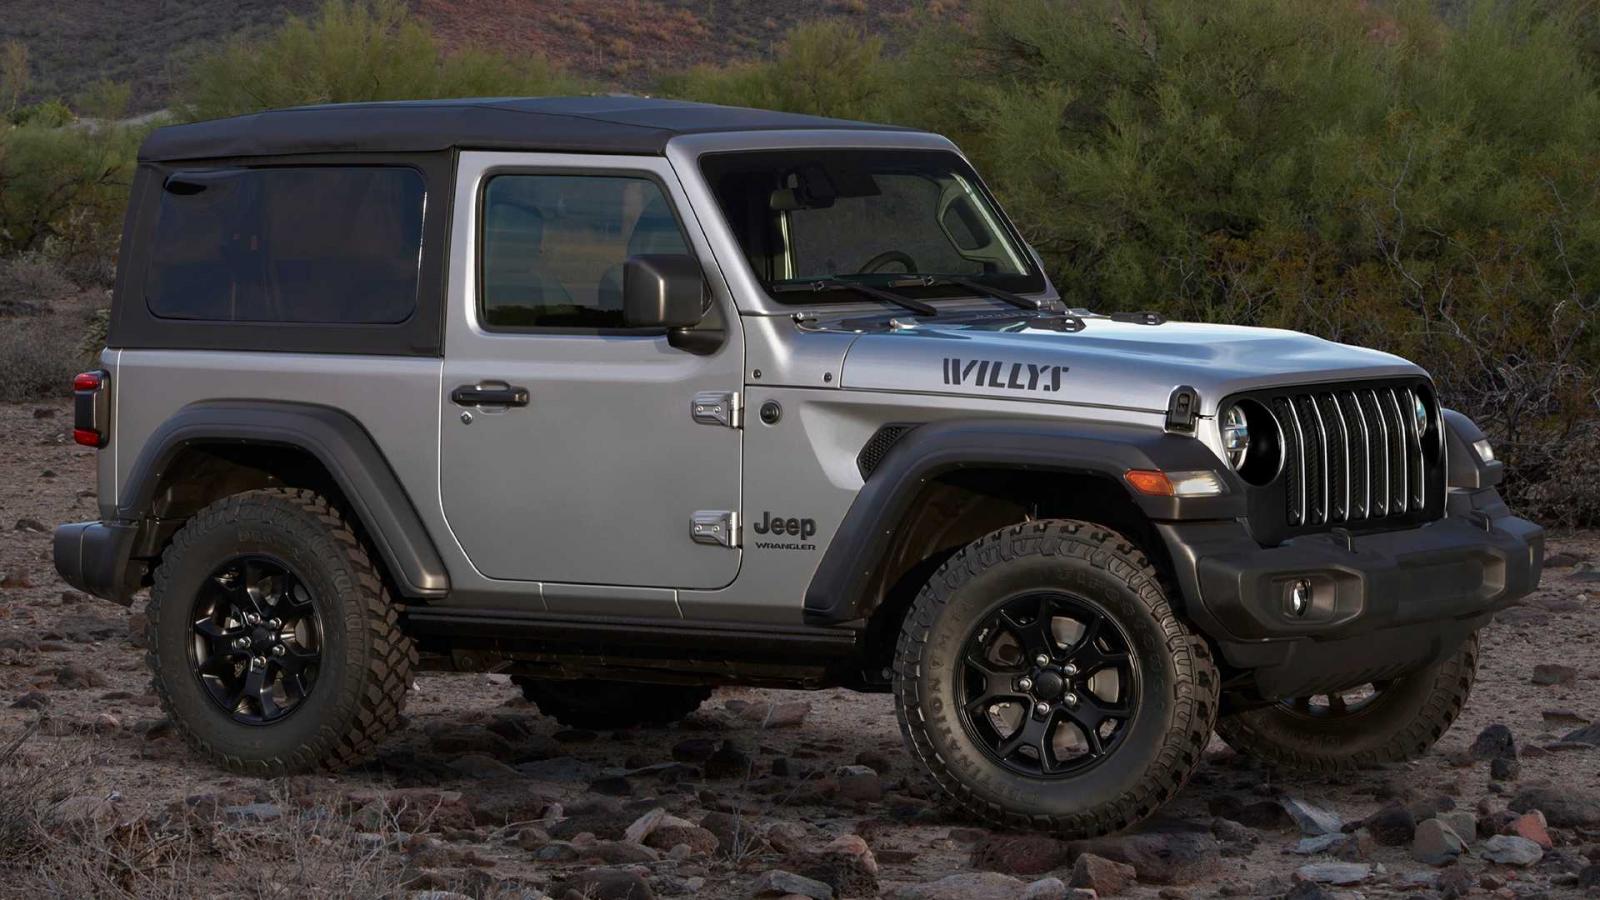 Jeep Wrangler Willys Edition 2020.